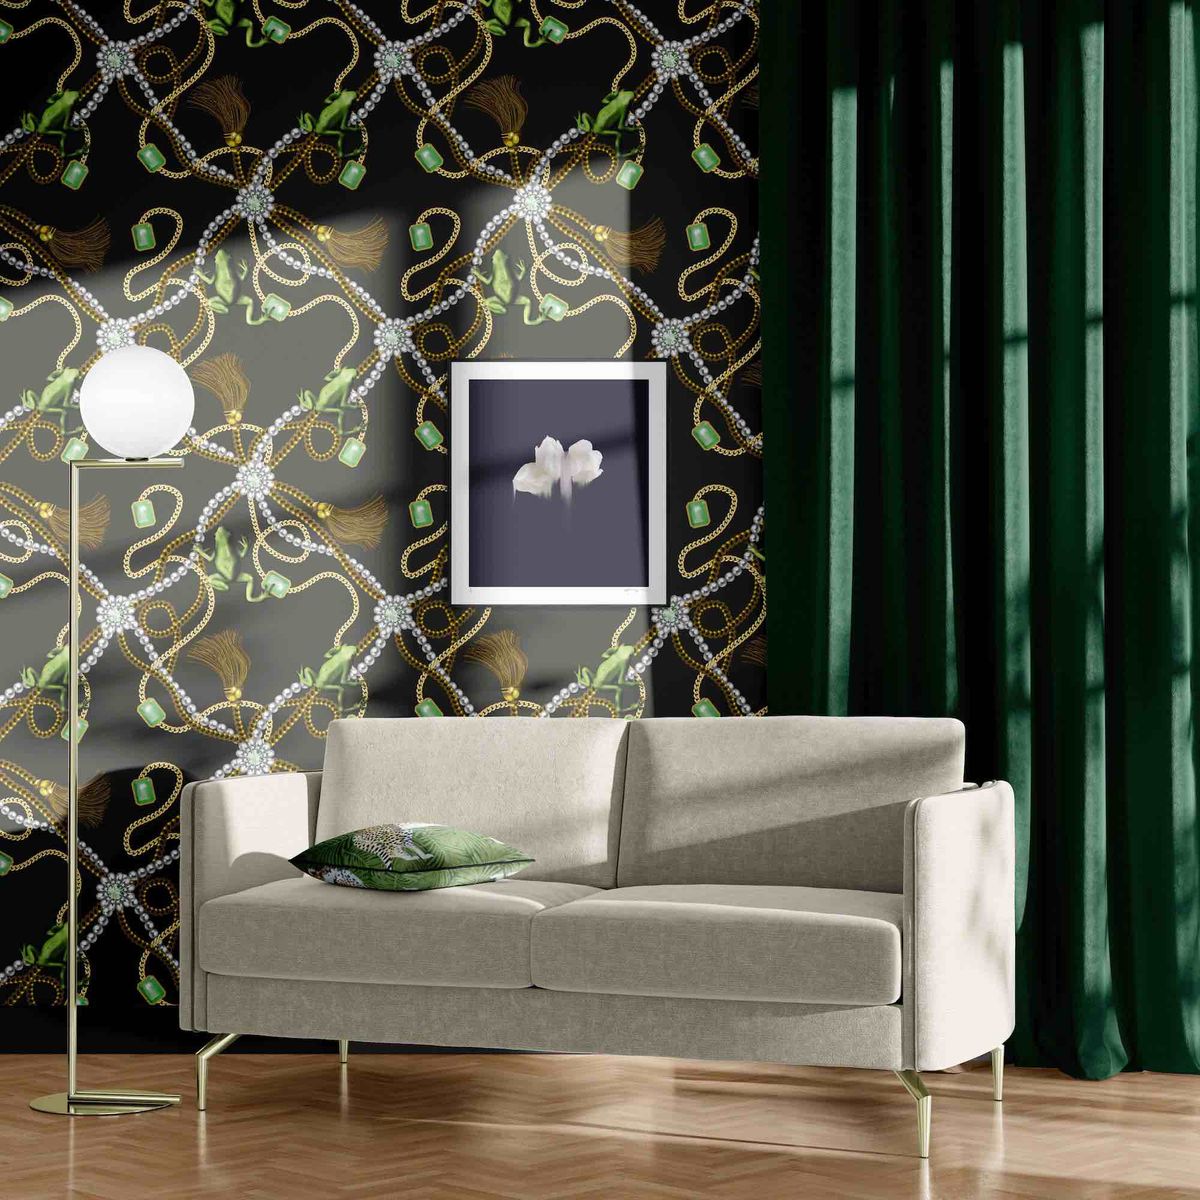 <p>For the eccentrics amongst us, use this wallpaper on all four walls, but it would also be fabulous on a feature wall. With sweeping tangles of chains, pearls, jewels and frogs, it’s like being inside a fairy tale.</p><p><em>Pictured: Tiana Antique, <a href="https://thecuriousdepartment.com/products/tiana-antique-wallpaper">The Curious Department</a></em></p>